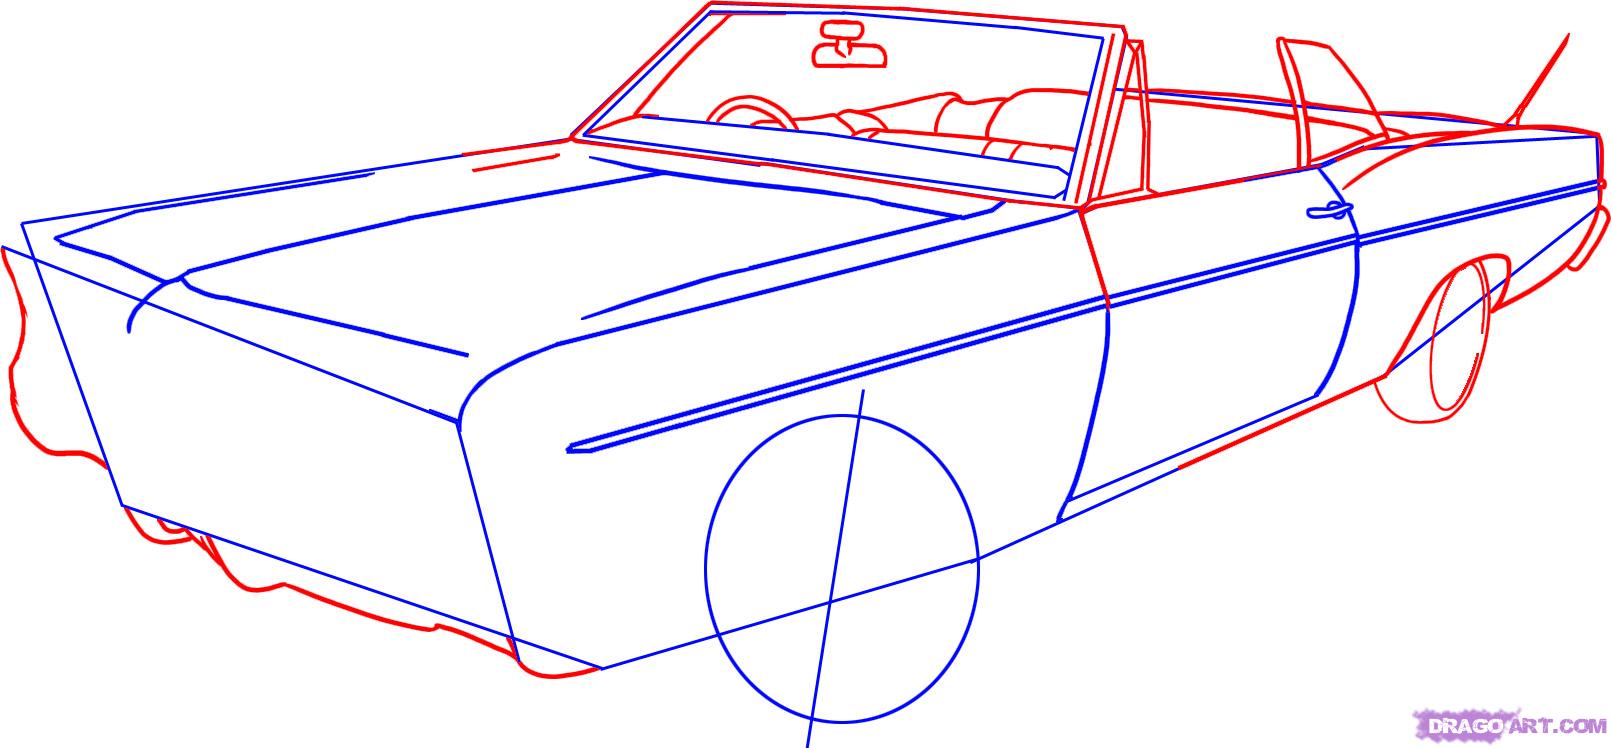 1612x748 how to draw a lowrider, step - Lowrider Car Drawings.